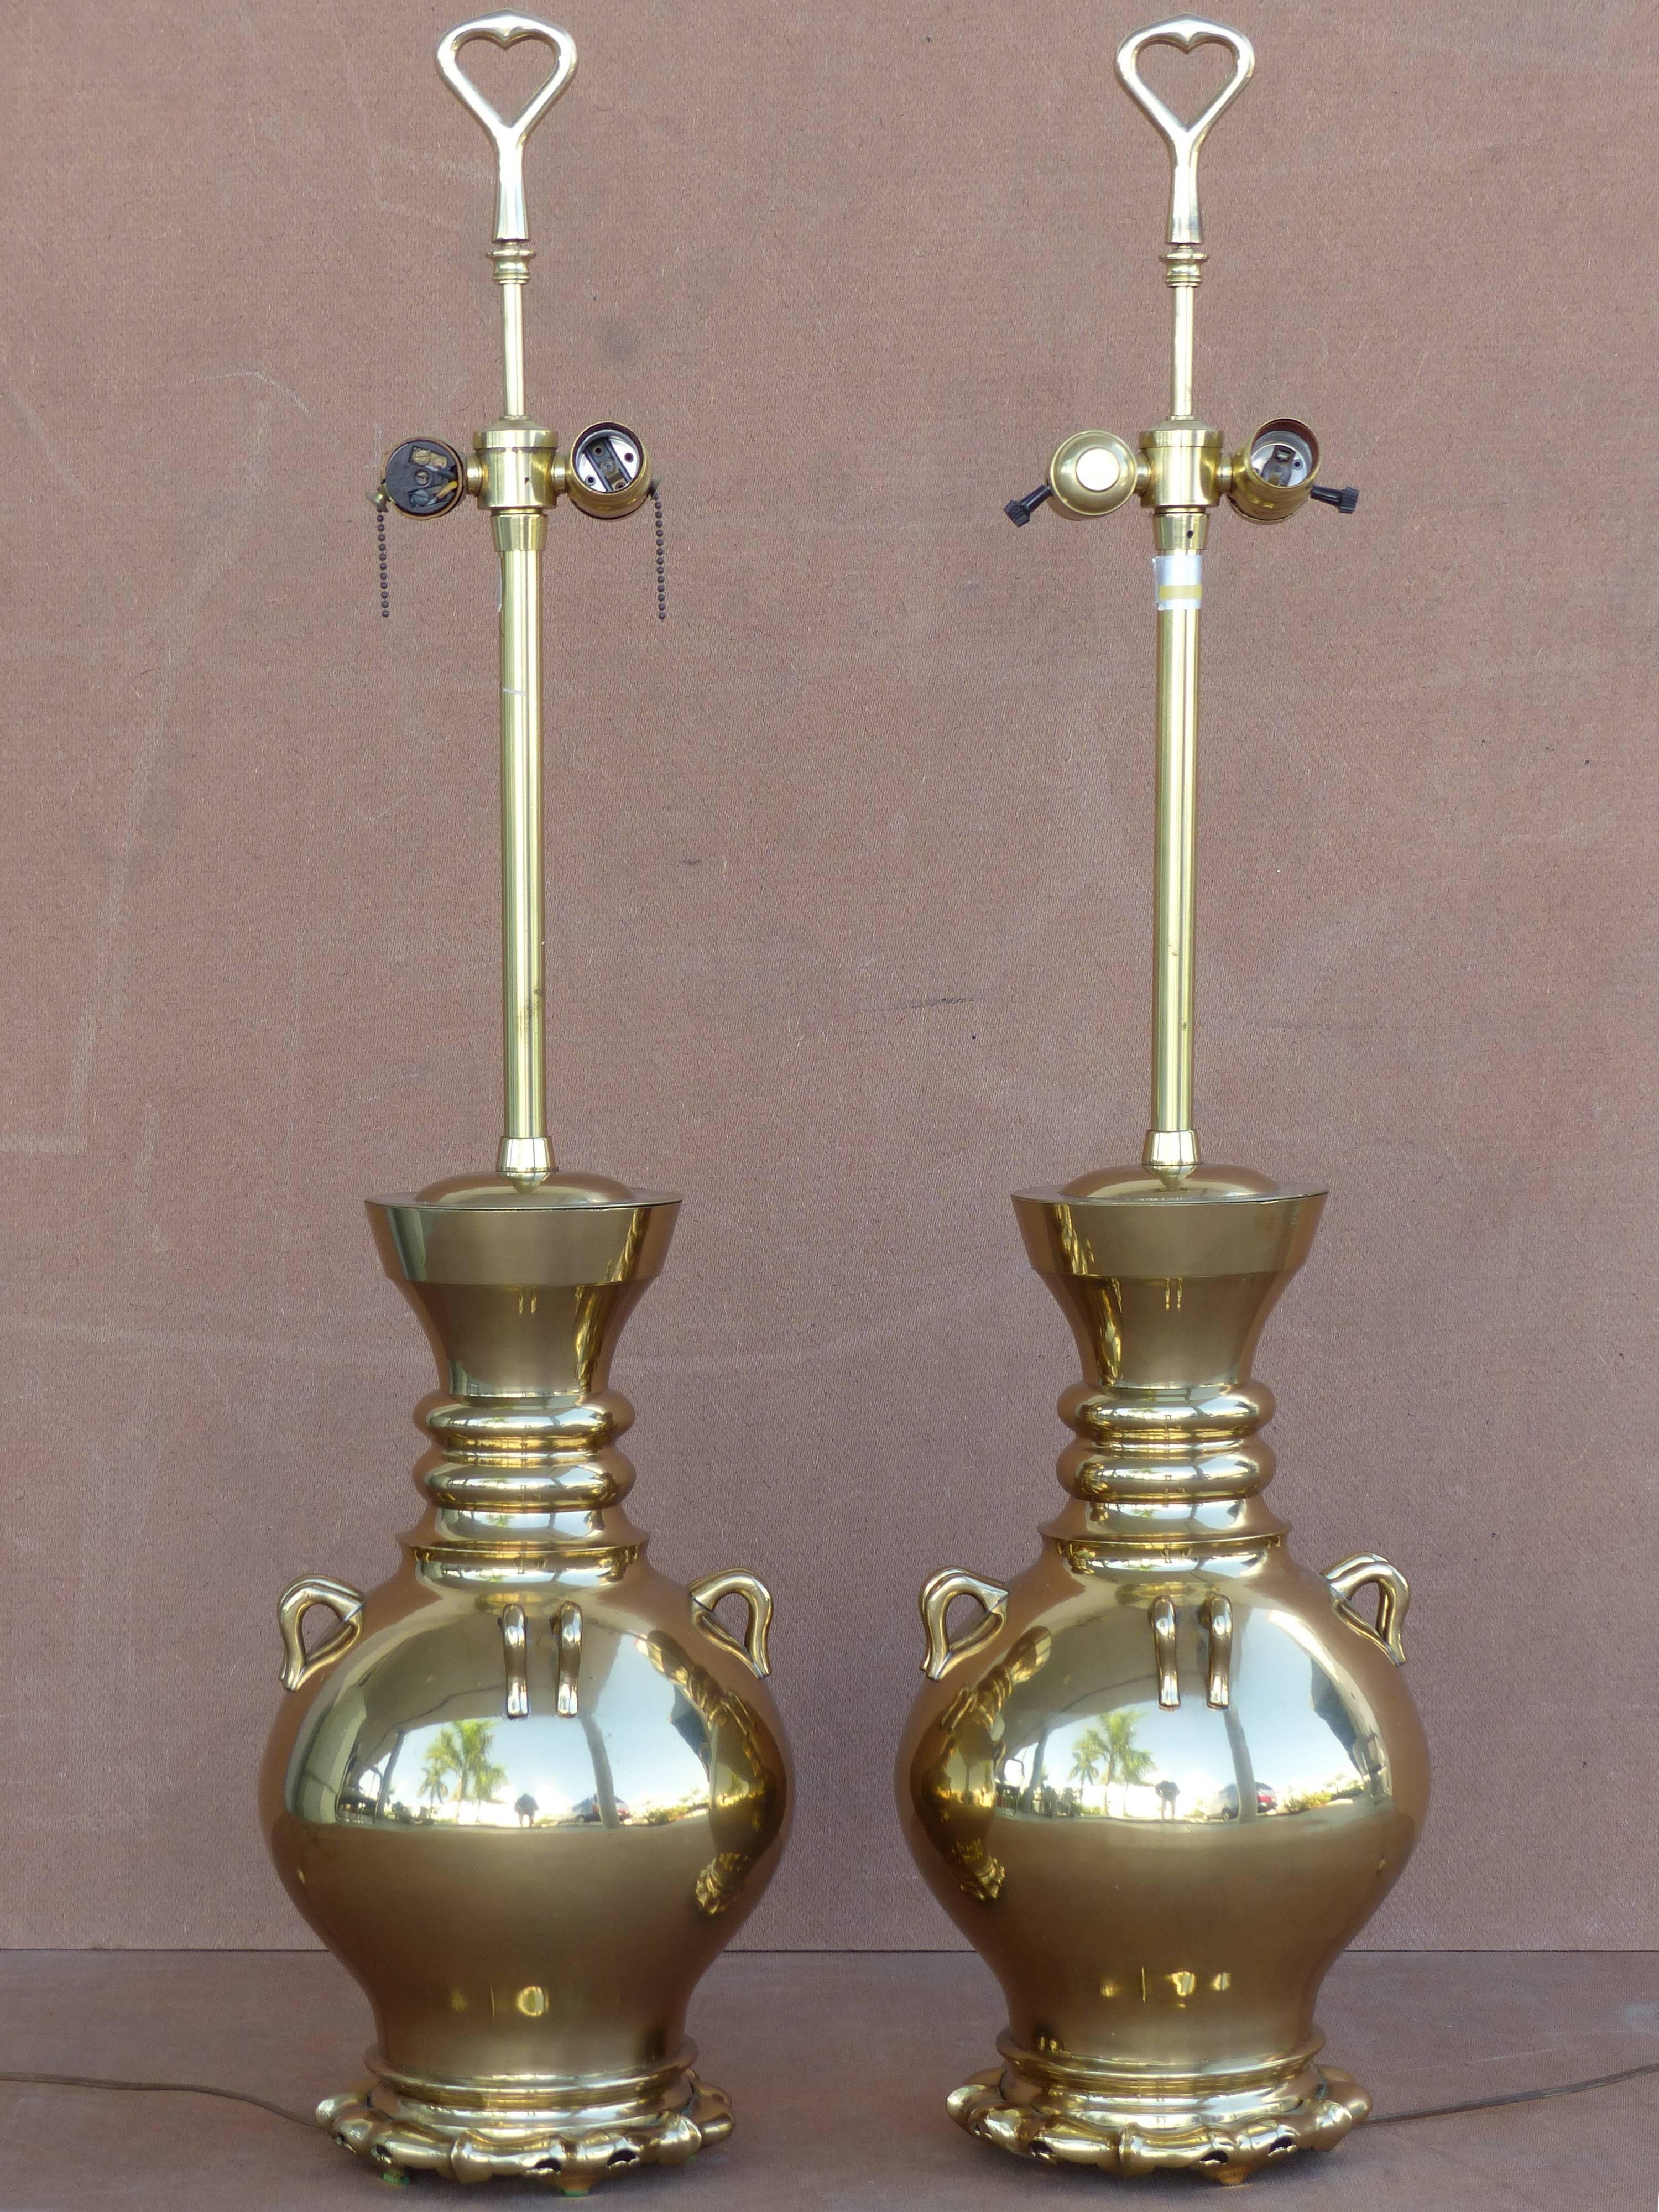 A fine quality pair of vintage brass lamps by Marbro. Shaped like urns with four handles, interesting jagged free-form bases, ribbed necks, and unusual finials that resemble bottle openers. Accommodate two standard socket bulbs. Original wiring in